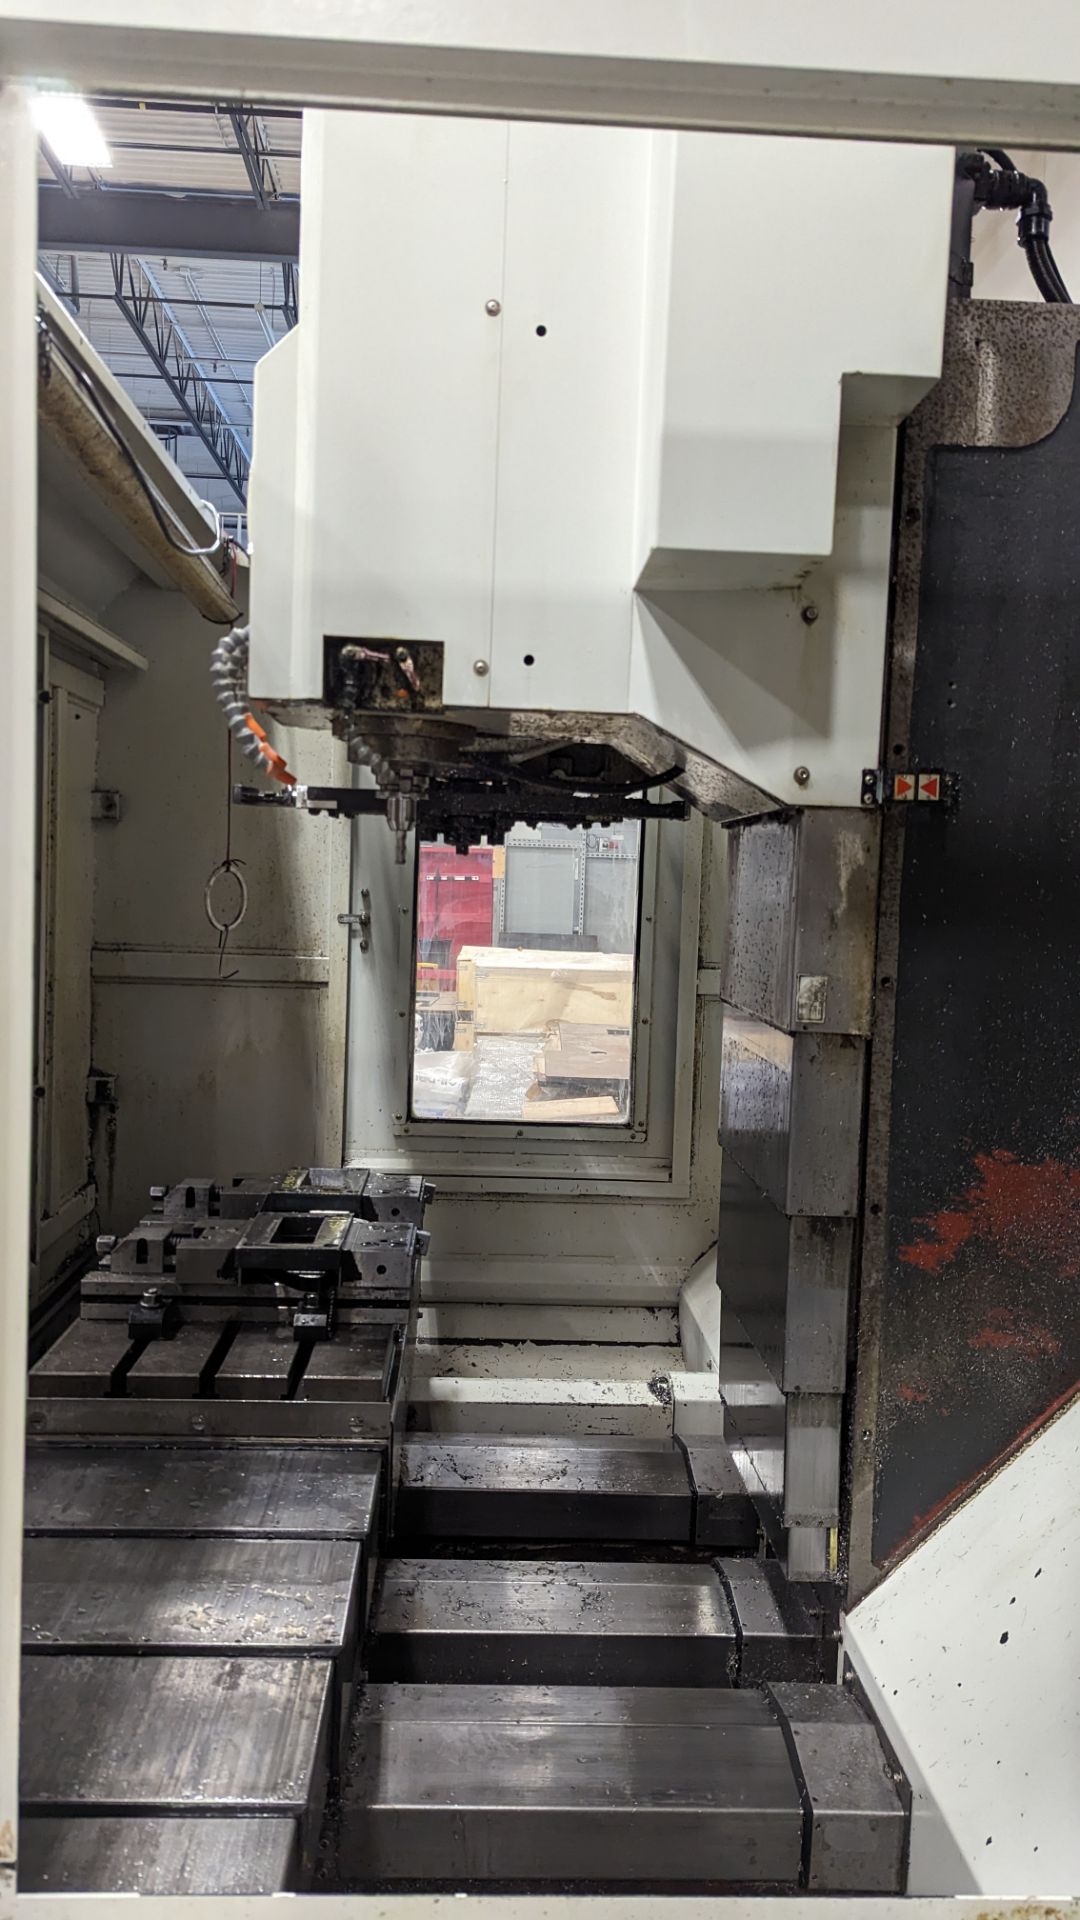 2012, FIRST, V700, CNC VERTICAL MACHINING CENTRE, 10,000 RPM, DIRECT DRIVE, BT40 SPINDLE, TRAVELS ( - Image 8 of 14